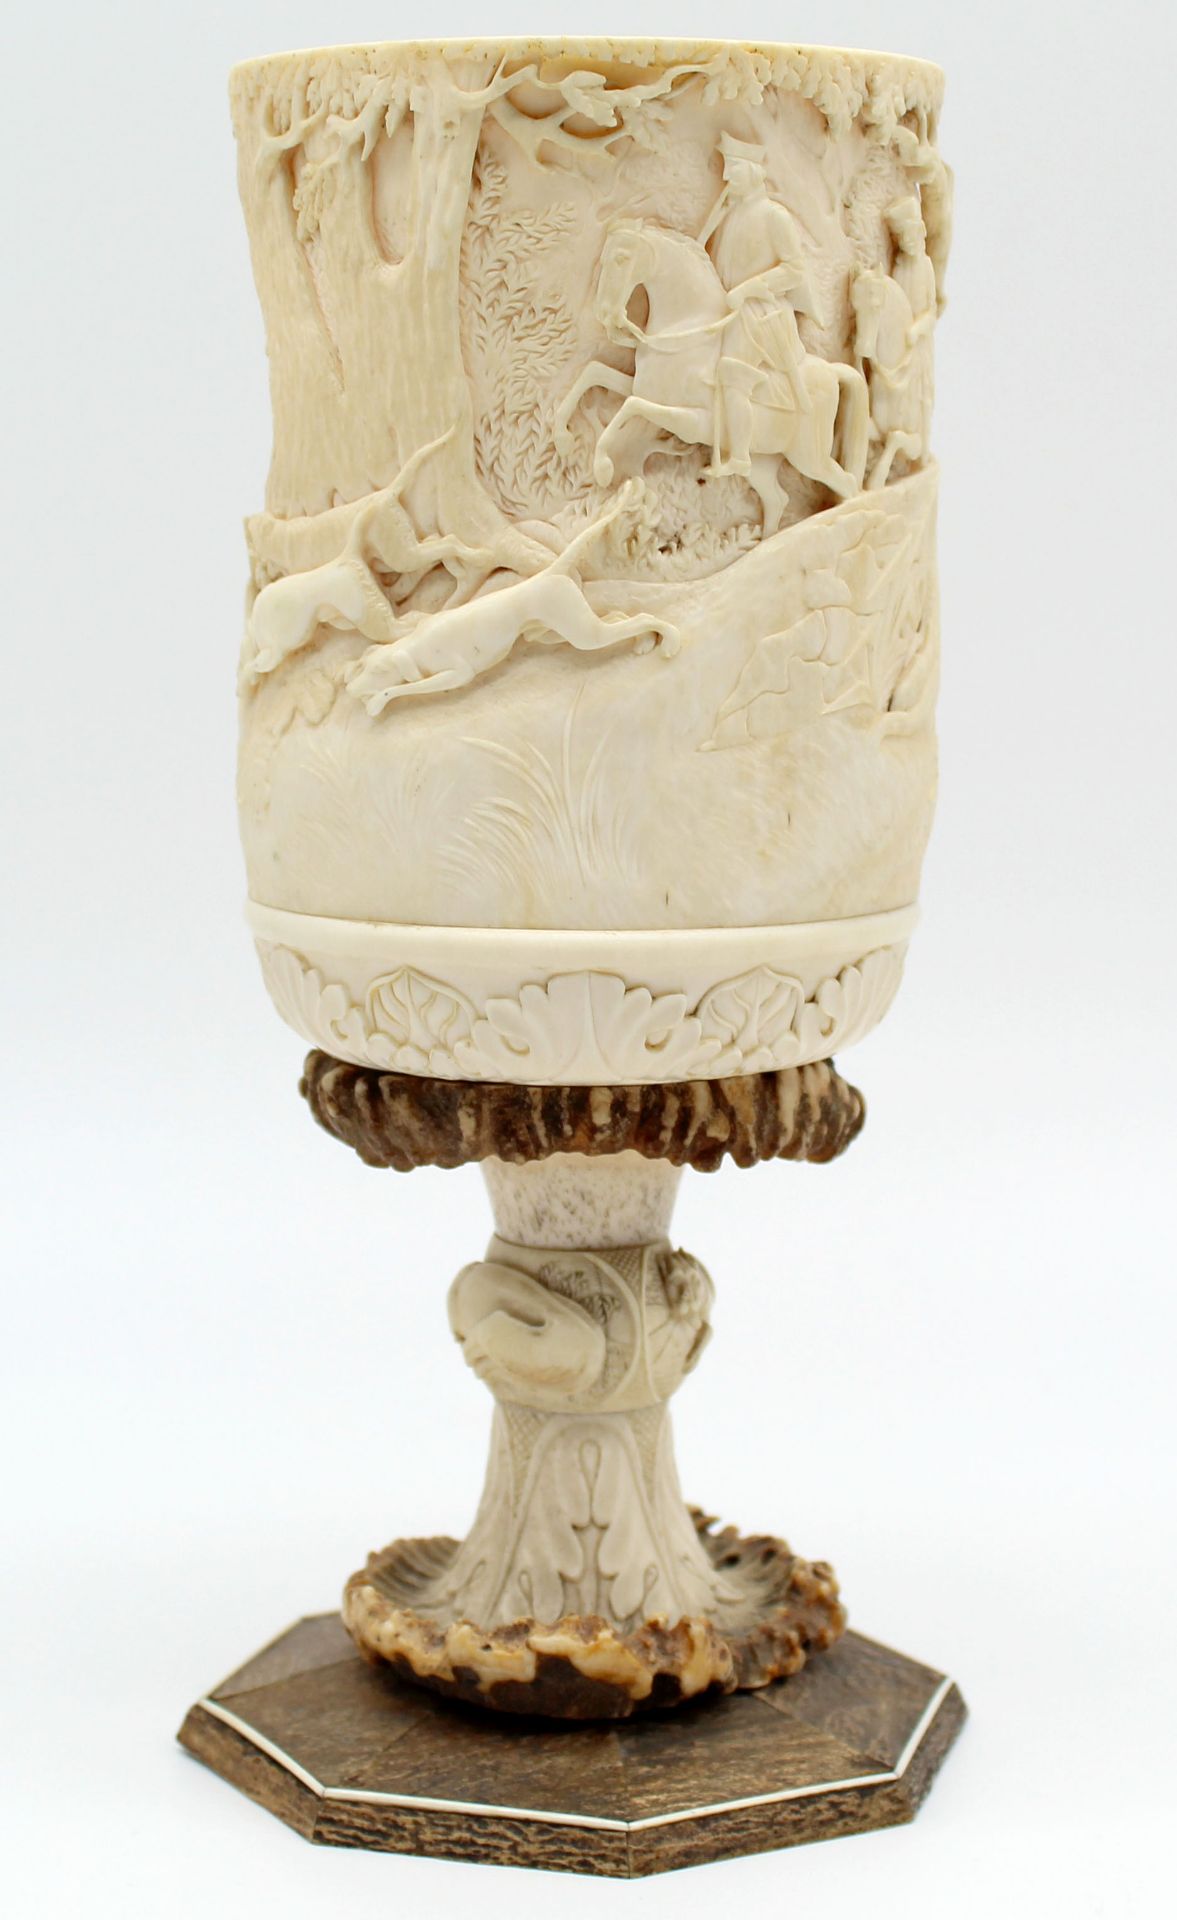 Ivory and stag horn around 1900. Probably Erbach. Hunting trophy. - Image 14 of 16